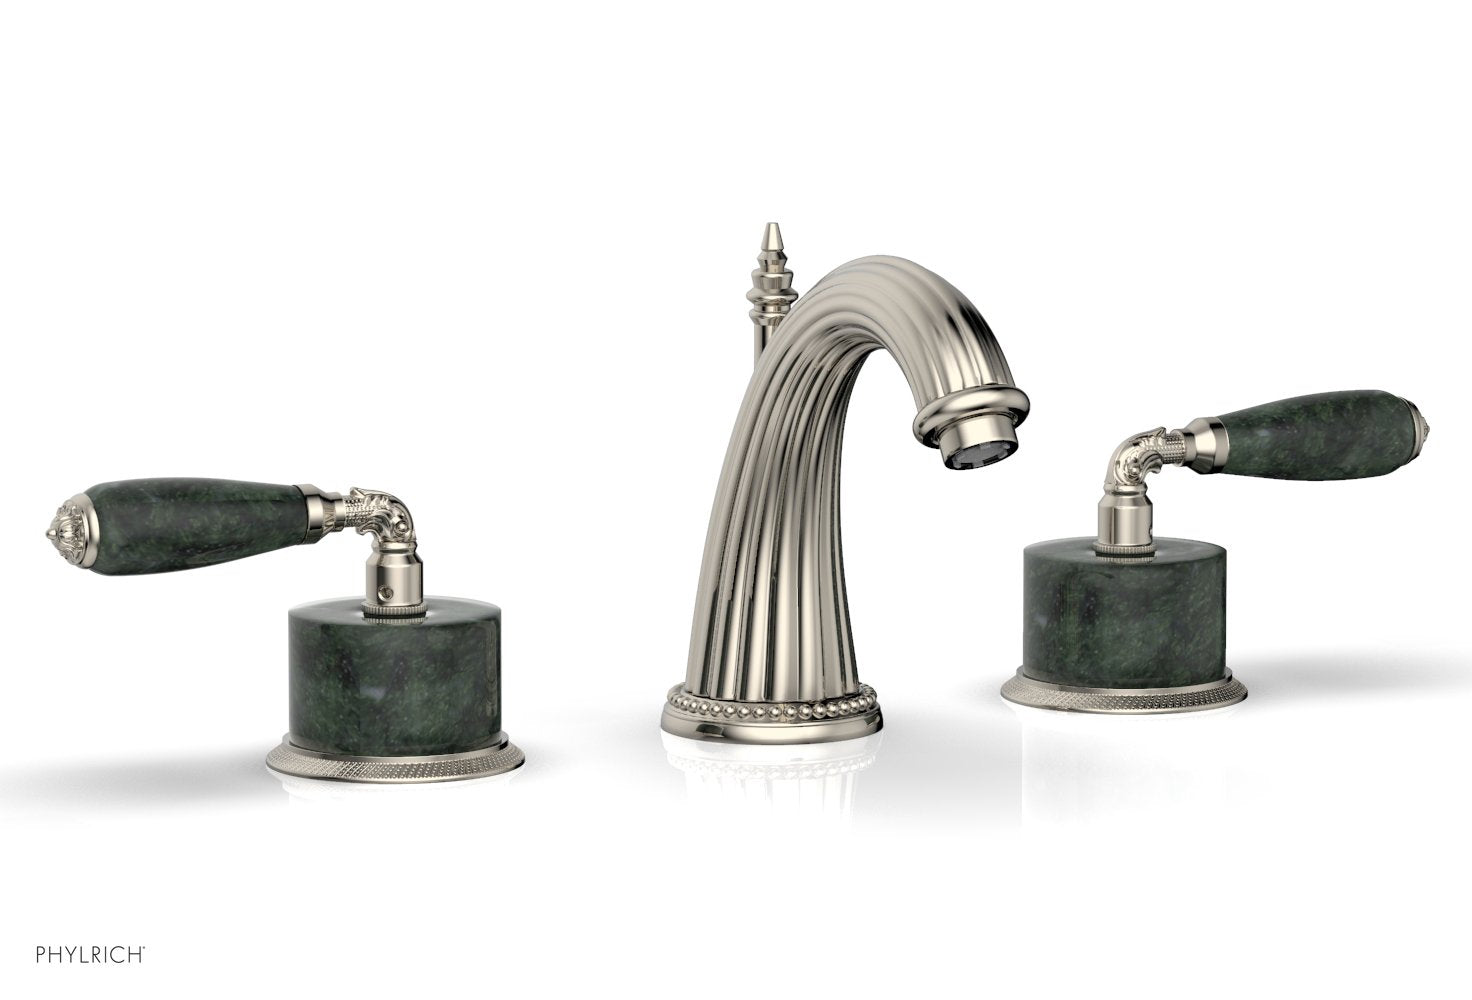 Phylrich VALENCIA Widespread Faucet Green Marble